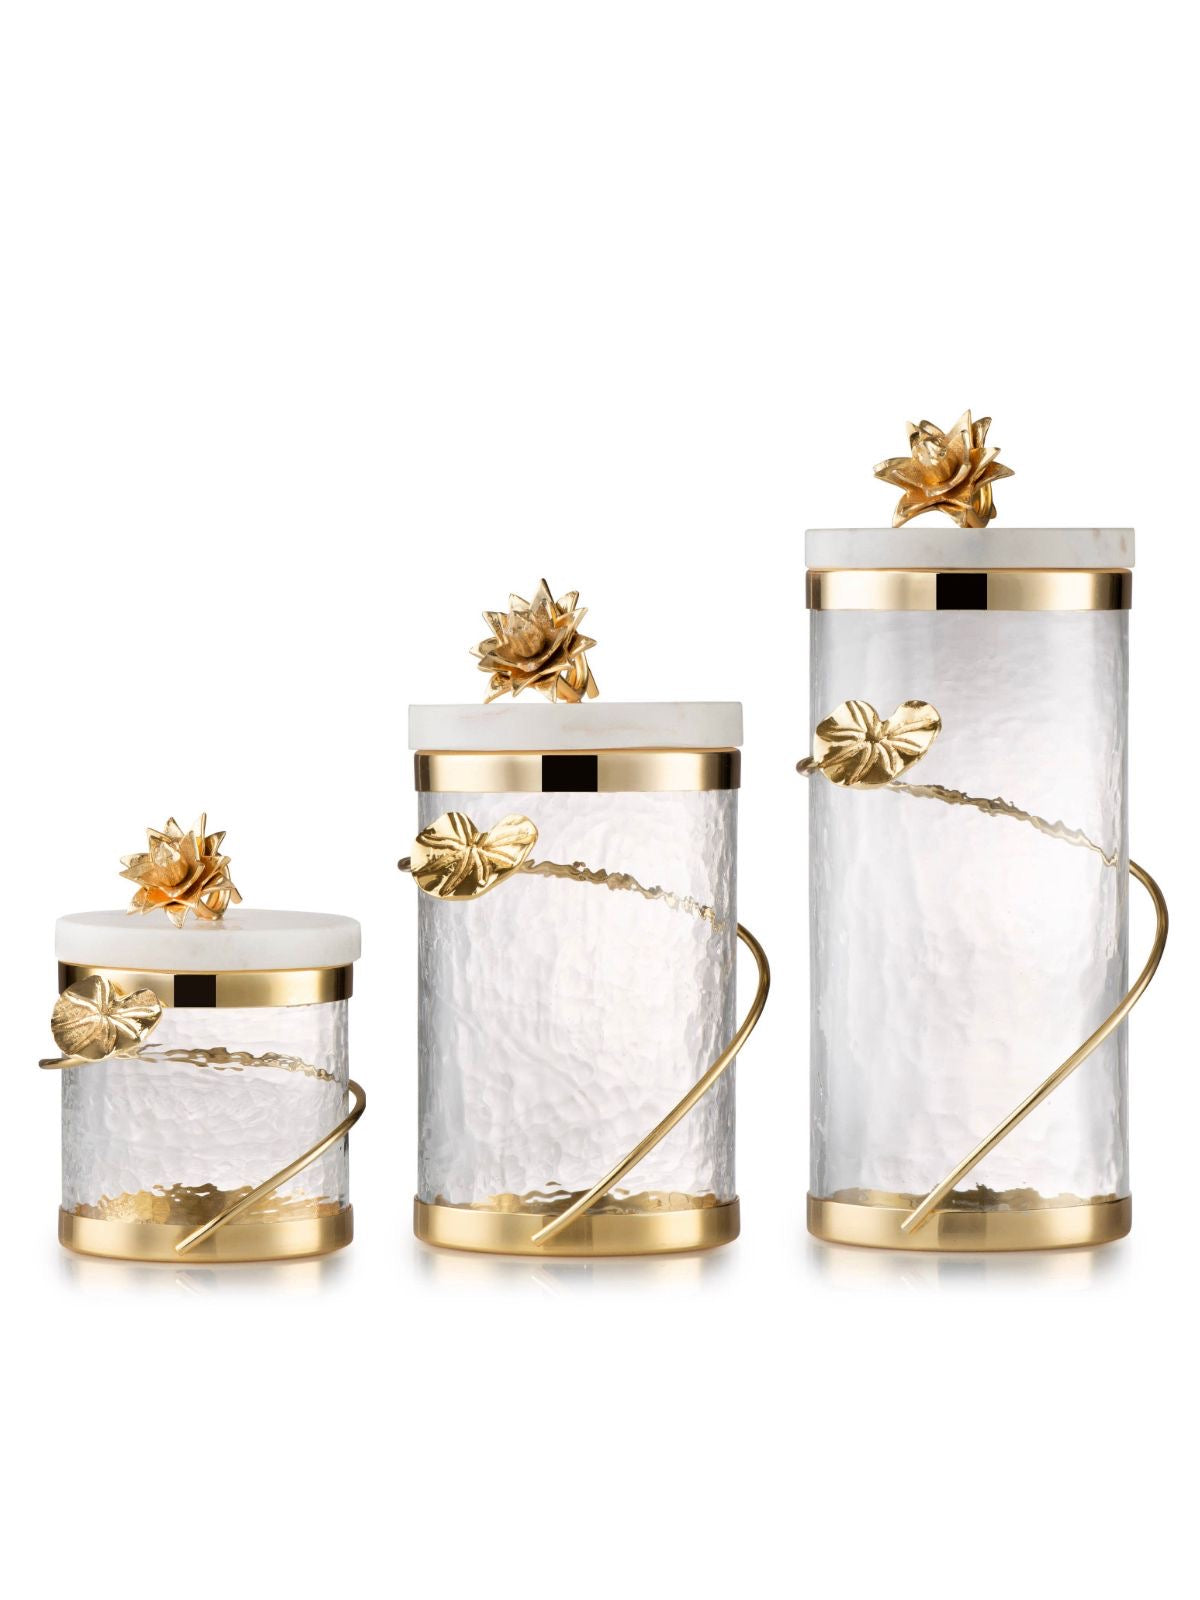 Luxury Kitchen Glass Canister With Gold Heart Design and Flower Knob Design on Marble Lid, 3 Sizes.